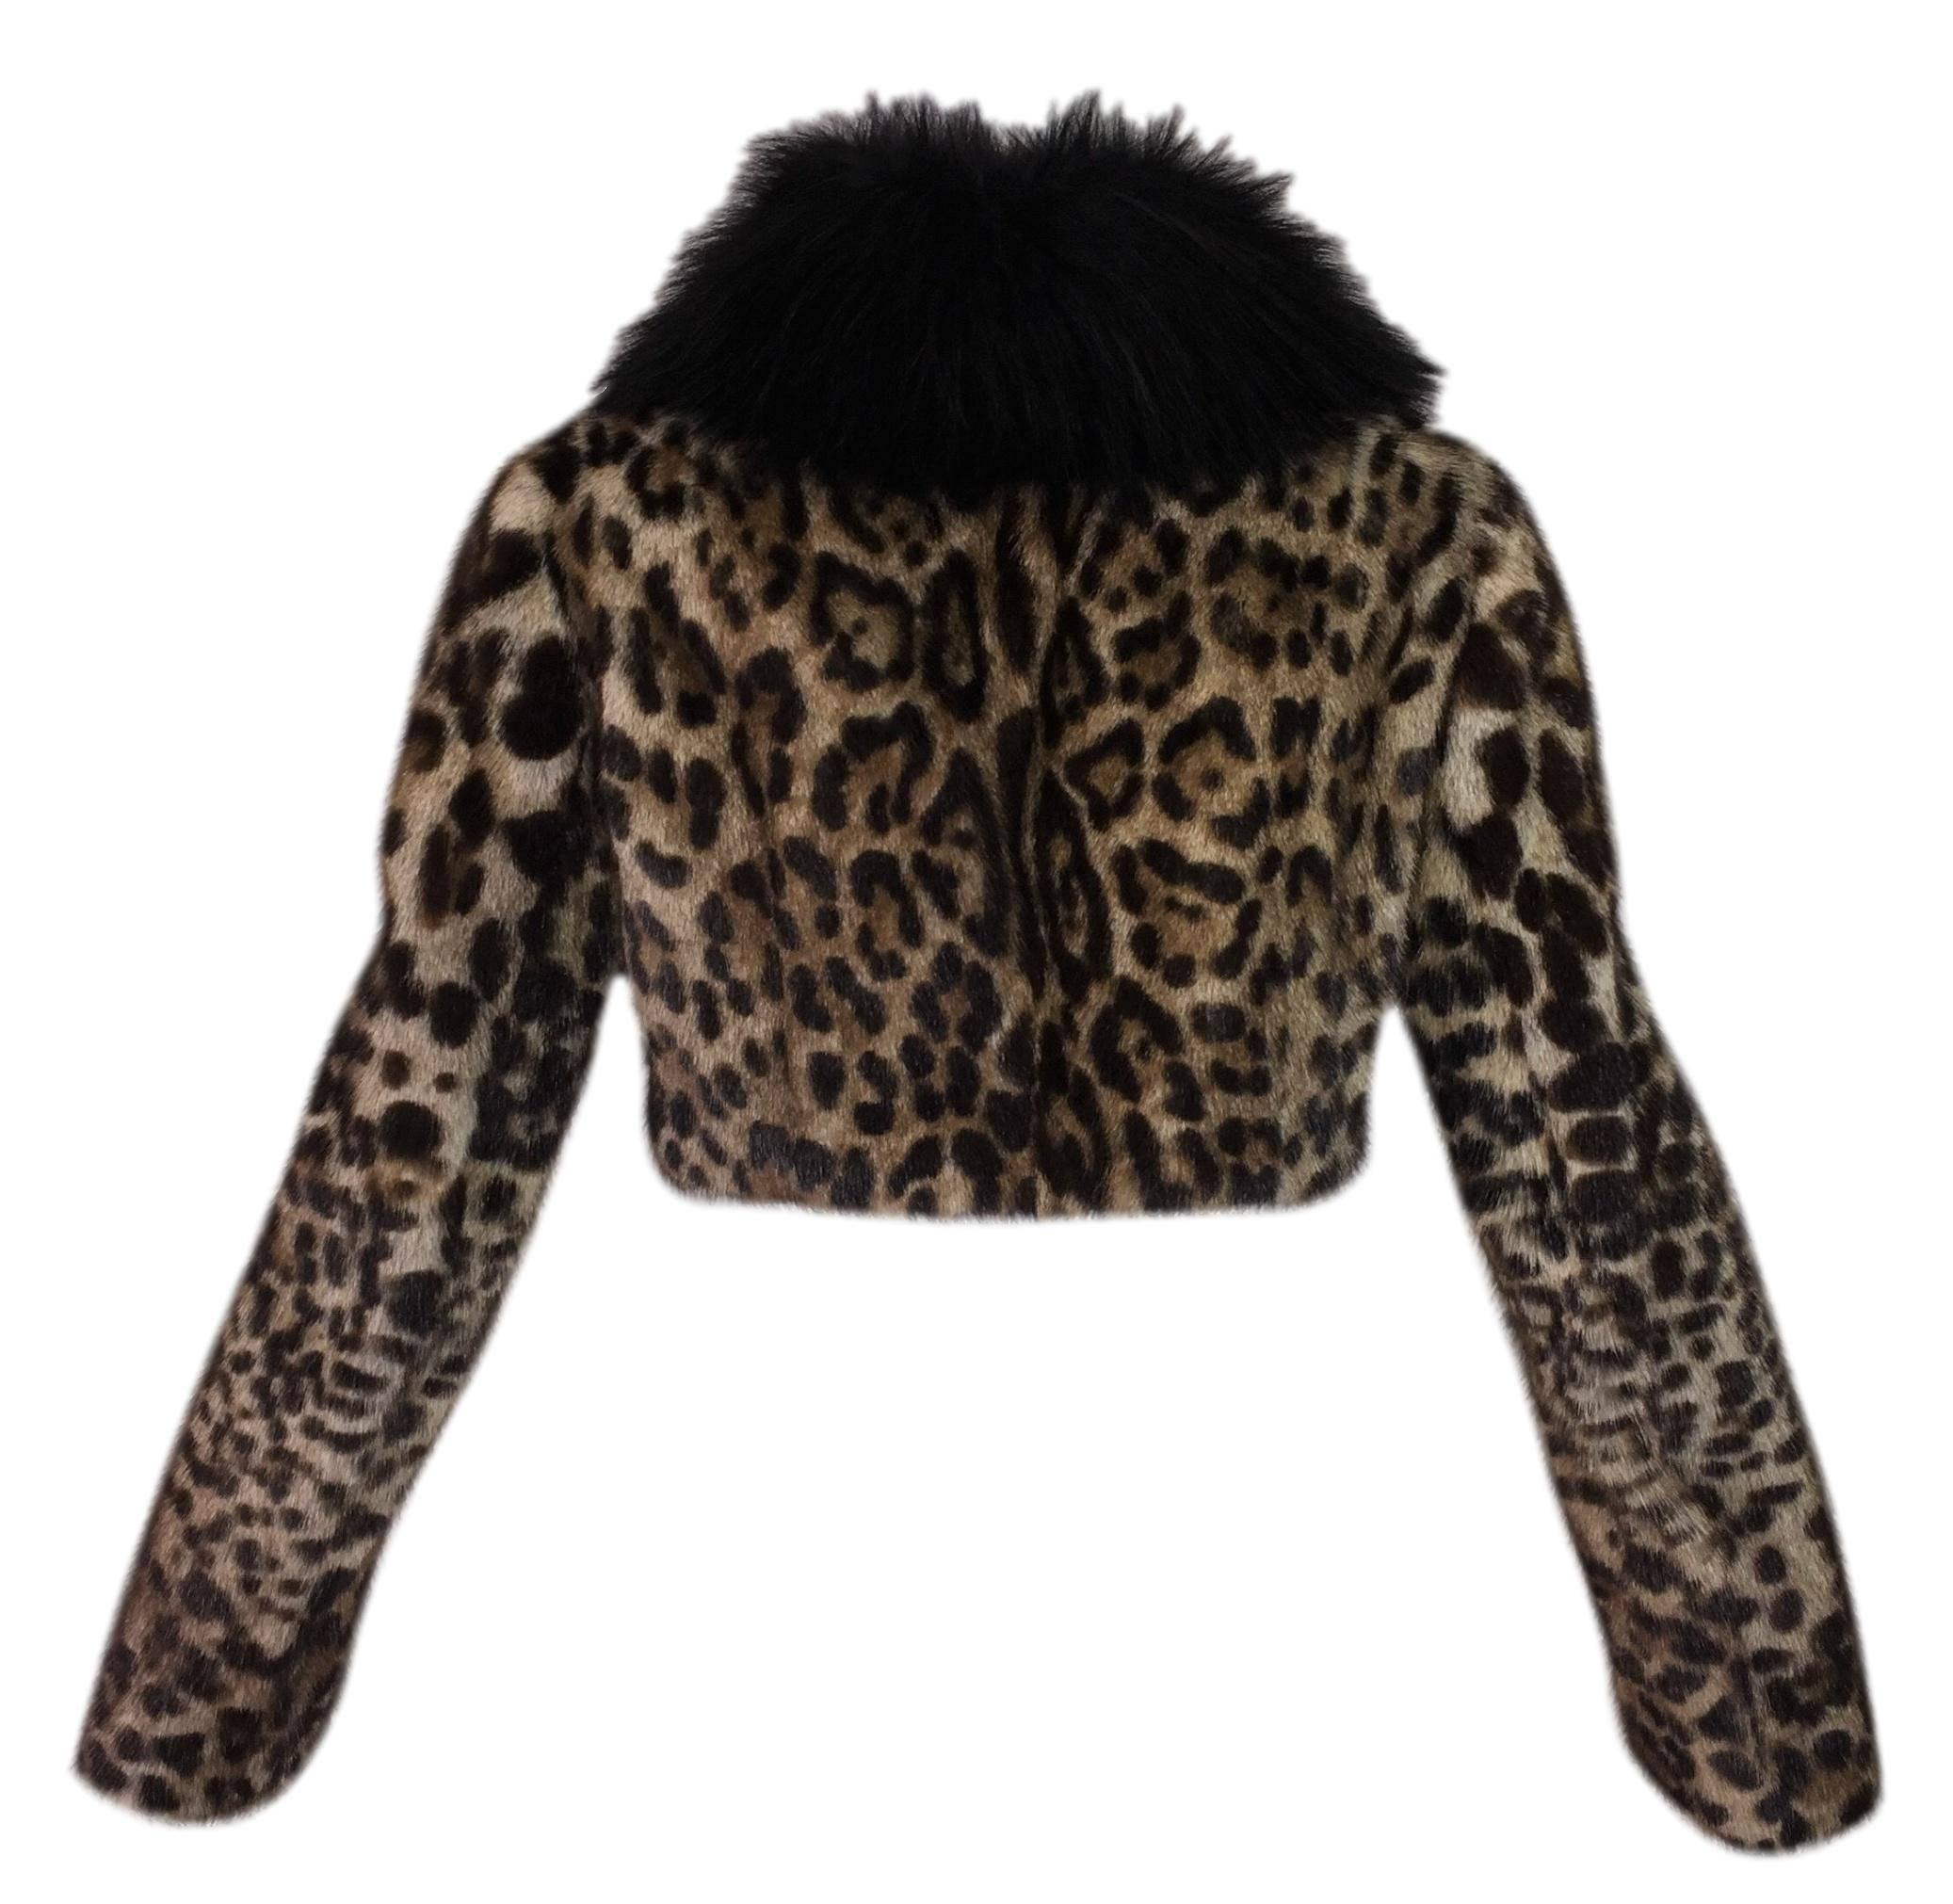 DESIGNER: Dolce & Gabbana Circa 2007

Please contact for more information and/or photos.

CONDITION: Pristine! Appears unworn!

FABRIC: Marmot fur with leopard print trimmed in fox fur.

COUNTRY MADE: Italy

SIZE: 42

MEASUREMENTS; provided as a